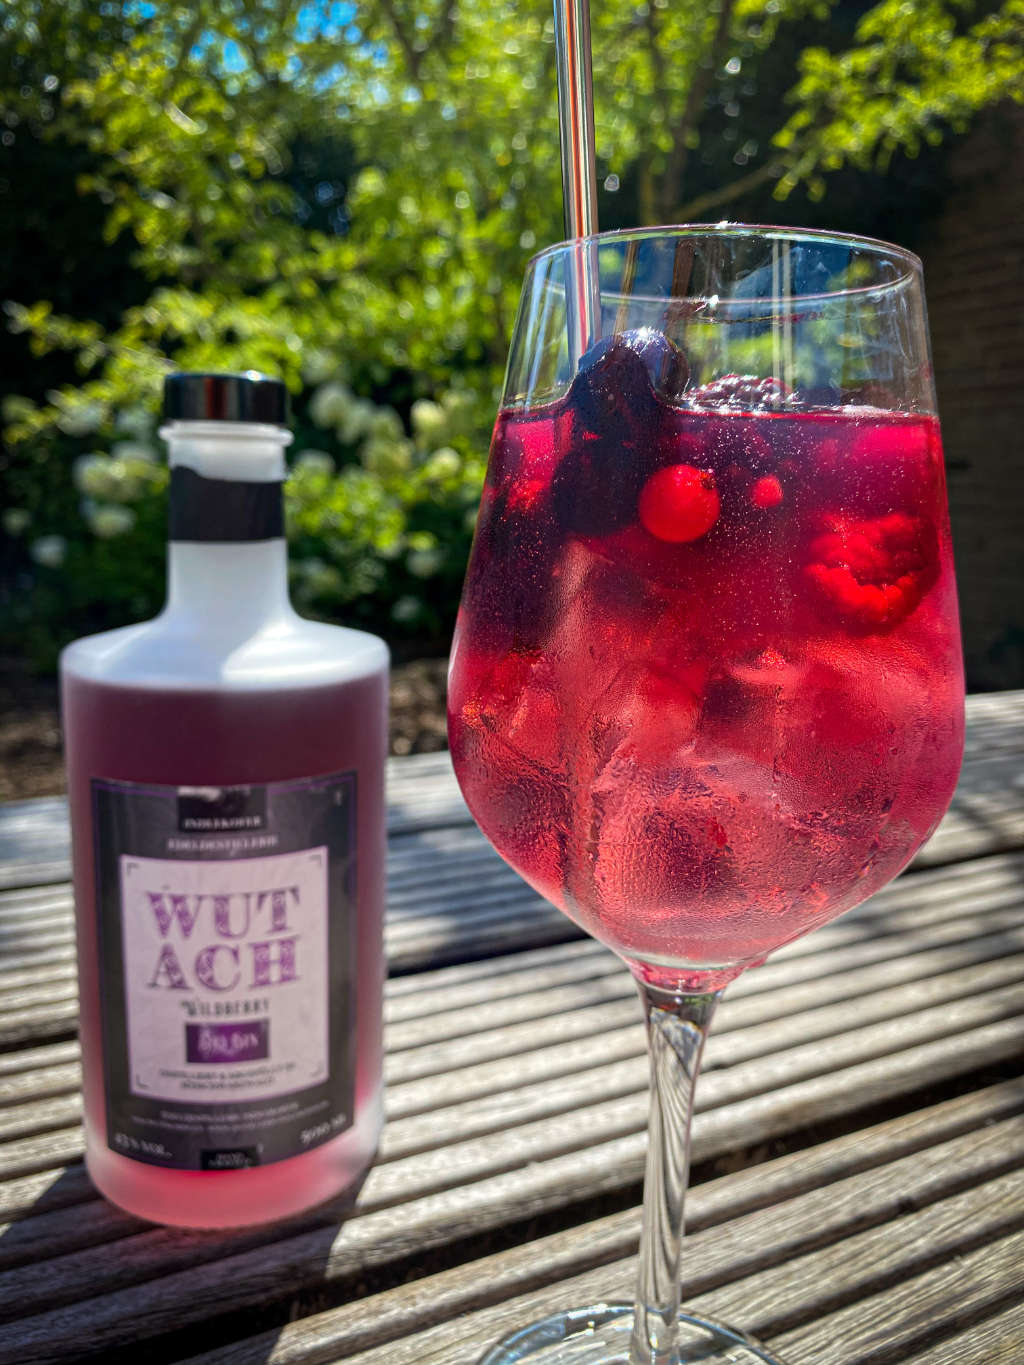 The photo showing a glas with red gin and tonic in a glas with ice cubes and wild berries. In the back a bottle of the gin.